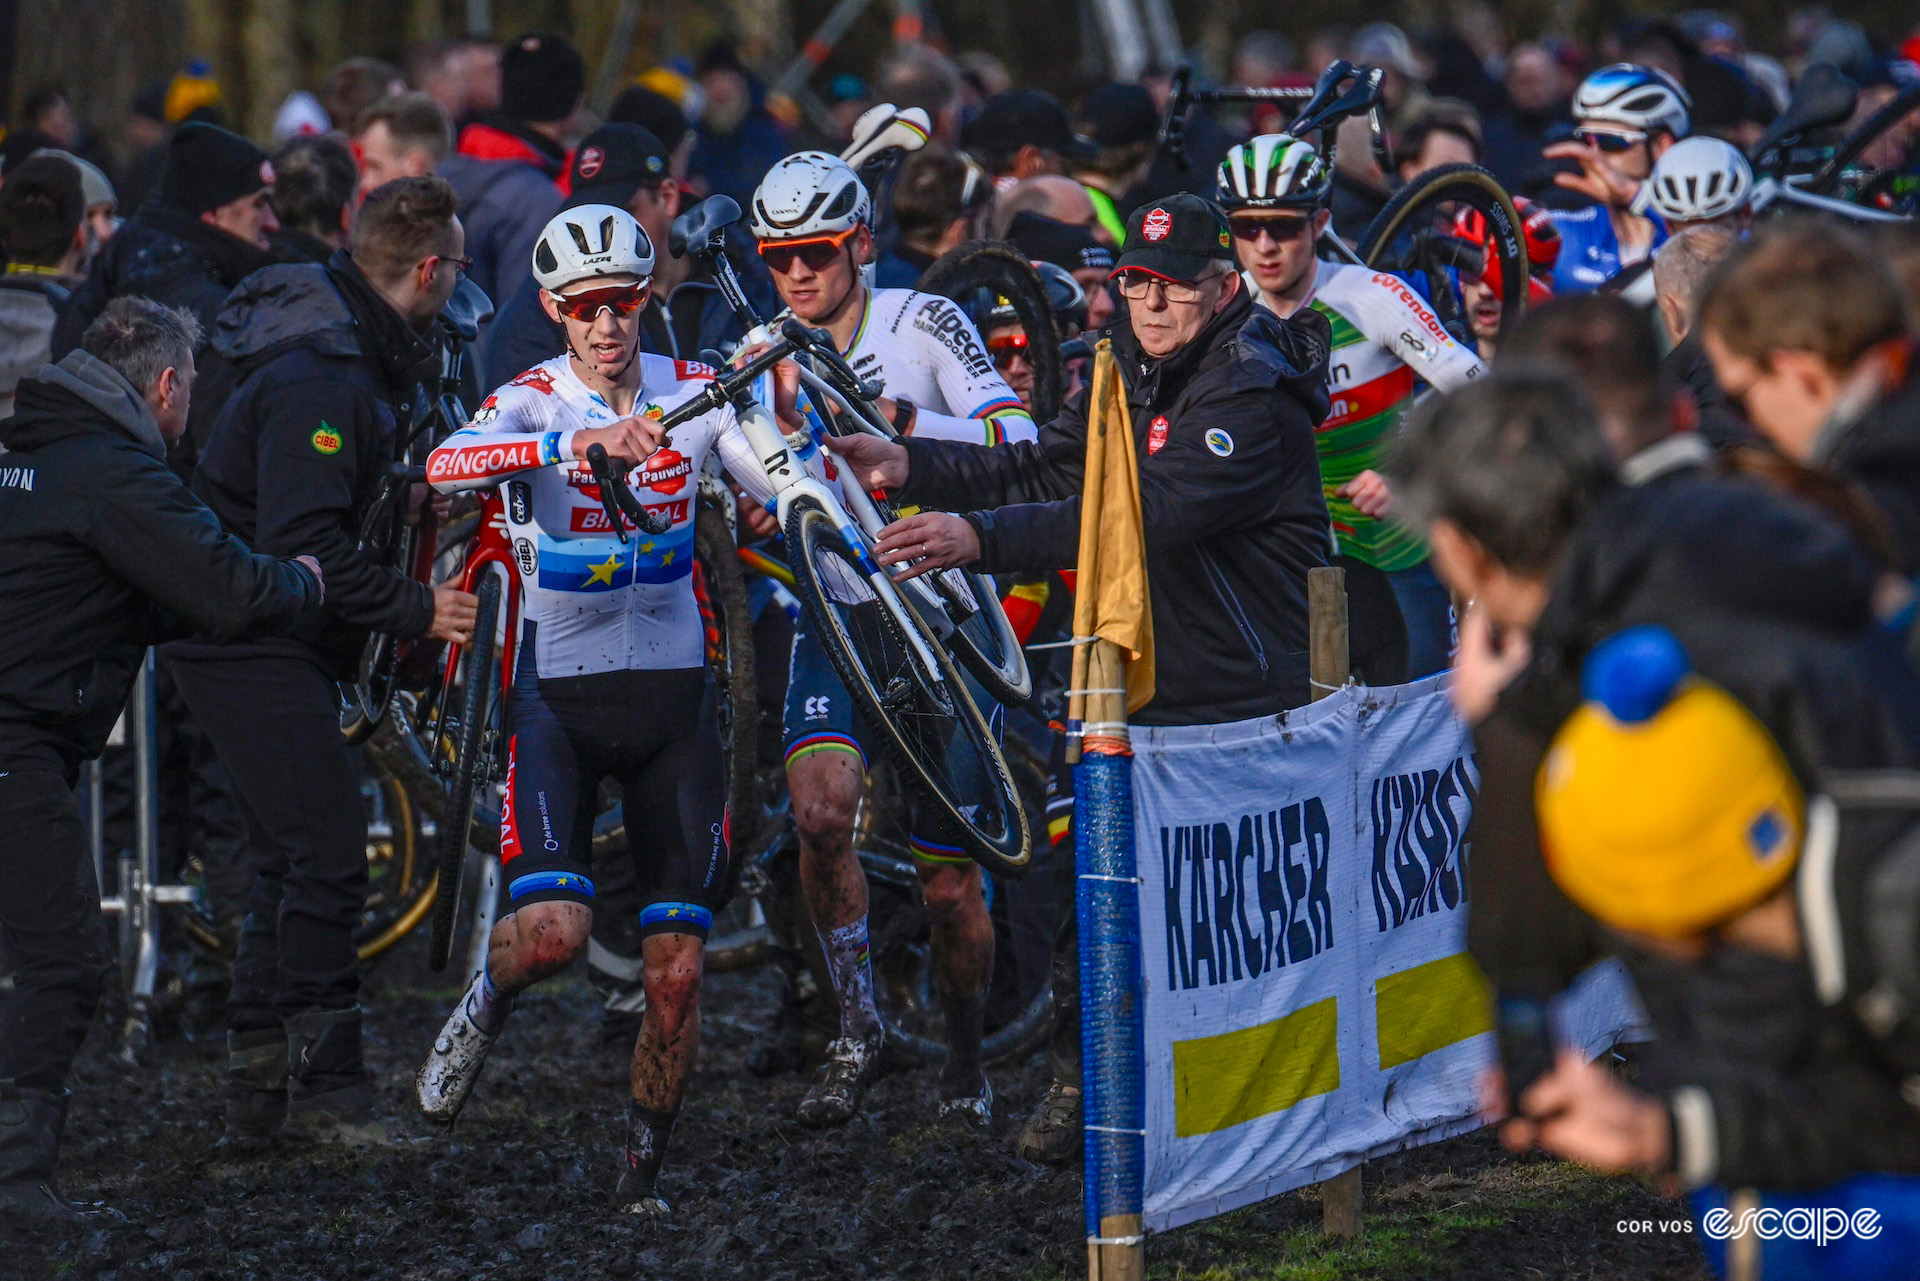 Michael Vanthourenhout leads the elite men out of the pits, bikes held aloft, during X2O Trofee Hamme - Flandriencross.